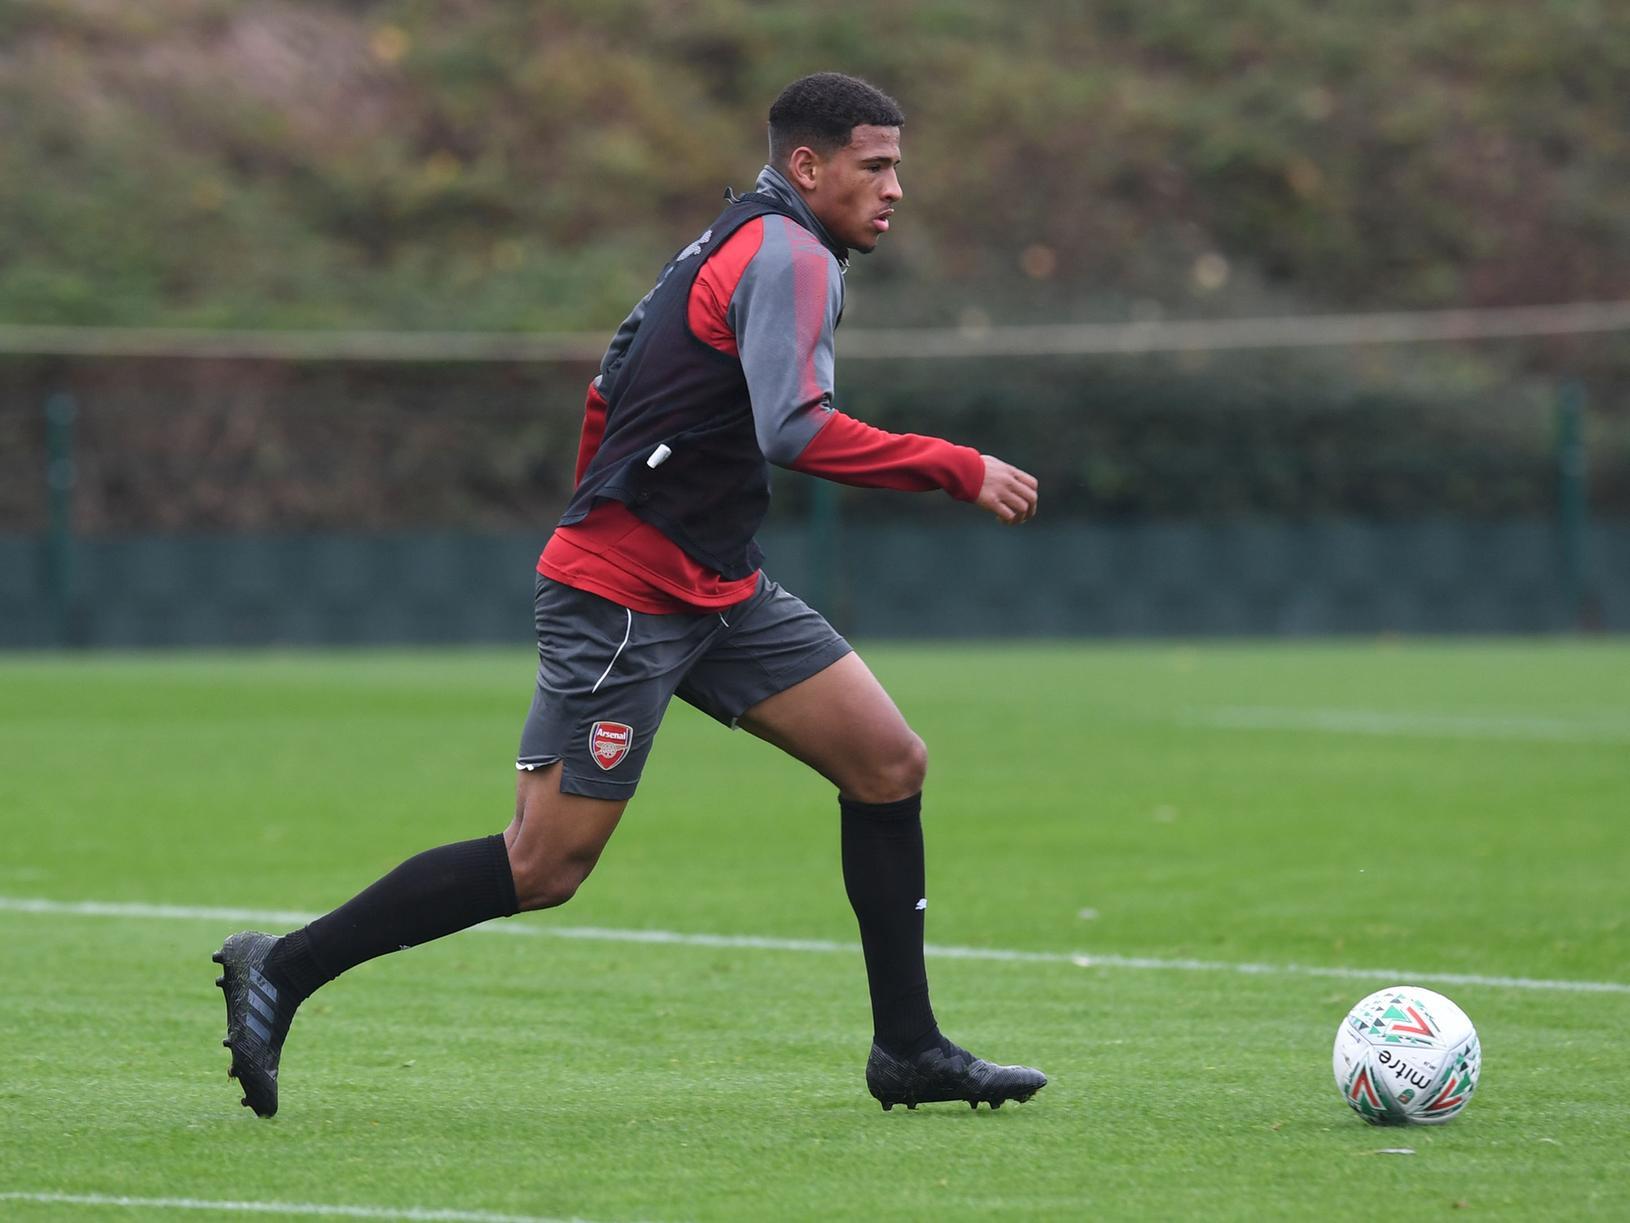 Nottingham Forest have seemingly signed former Arsenal academy midfielder Marcus McGuane, though their fans face a nervous wait for confirmation of international clearance.